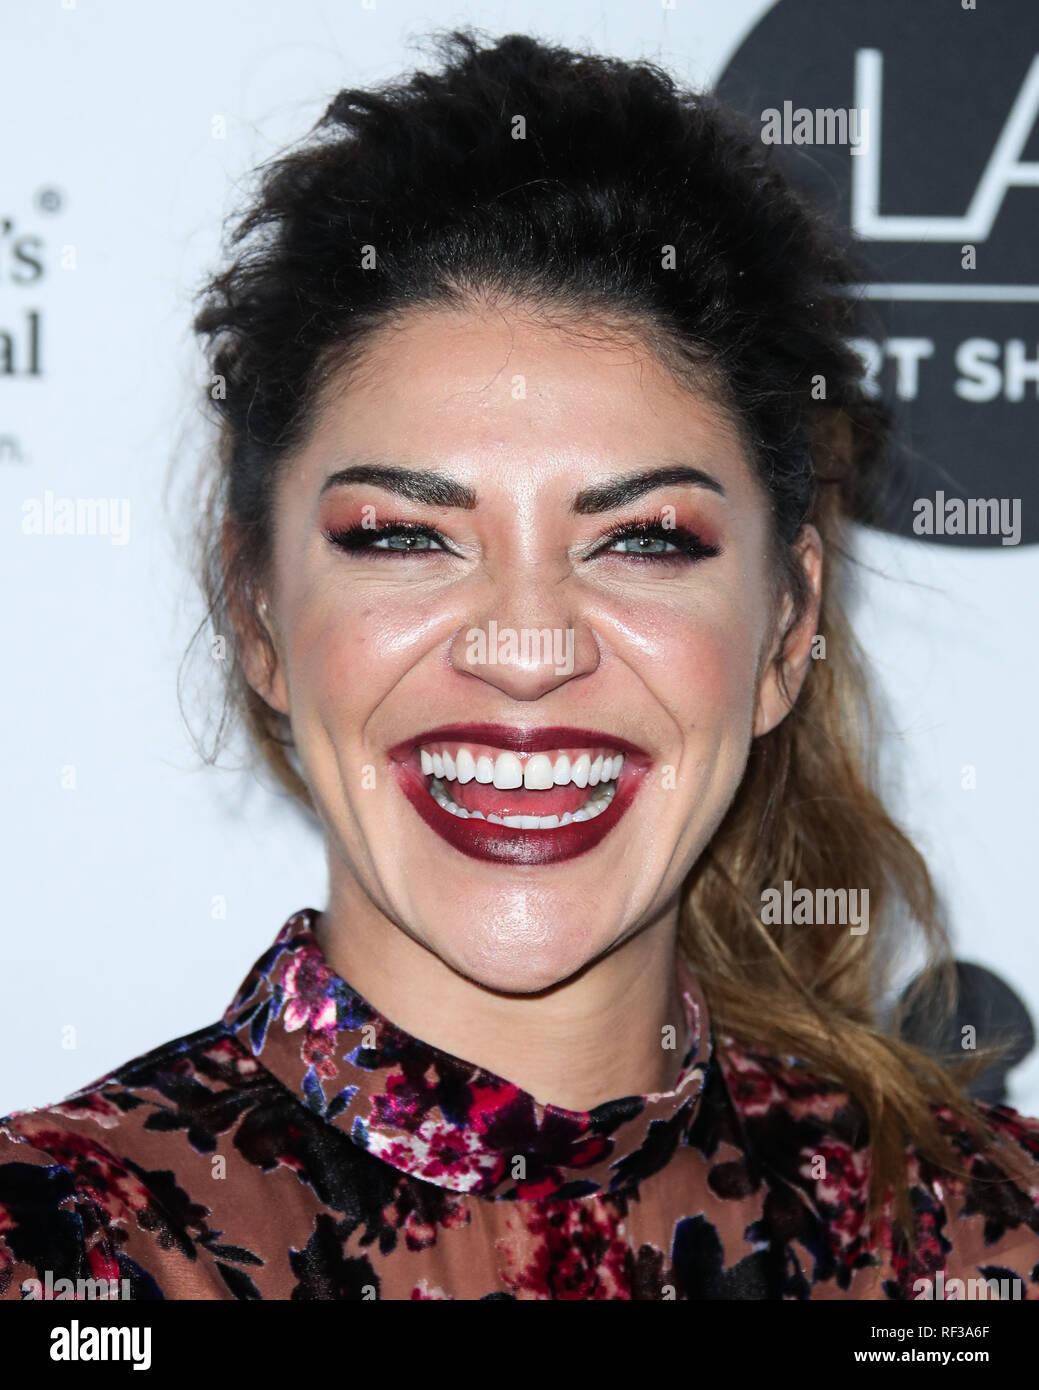 Los Angeles, California, USA. 23rd January, 2019. Actress Jessica Szohr arrives at the Los Angeles Art Show 2019 Opening Night Gala held at the Los Angeles Convention Center on January 23, 2019 in Los Angeles, California, United States. (Photo by Xavier Collin/Image Press Agency) Credit: Image Press Agency/Alamy Live News Stock Photo